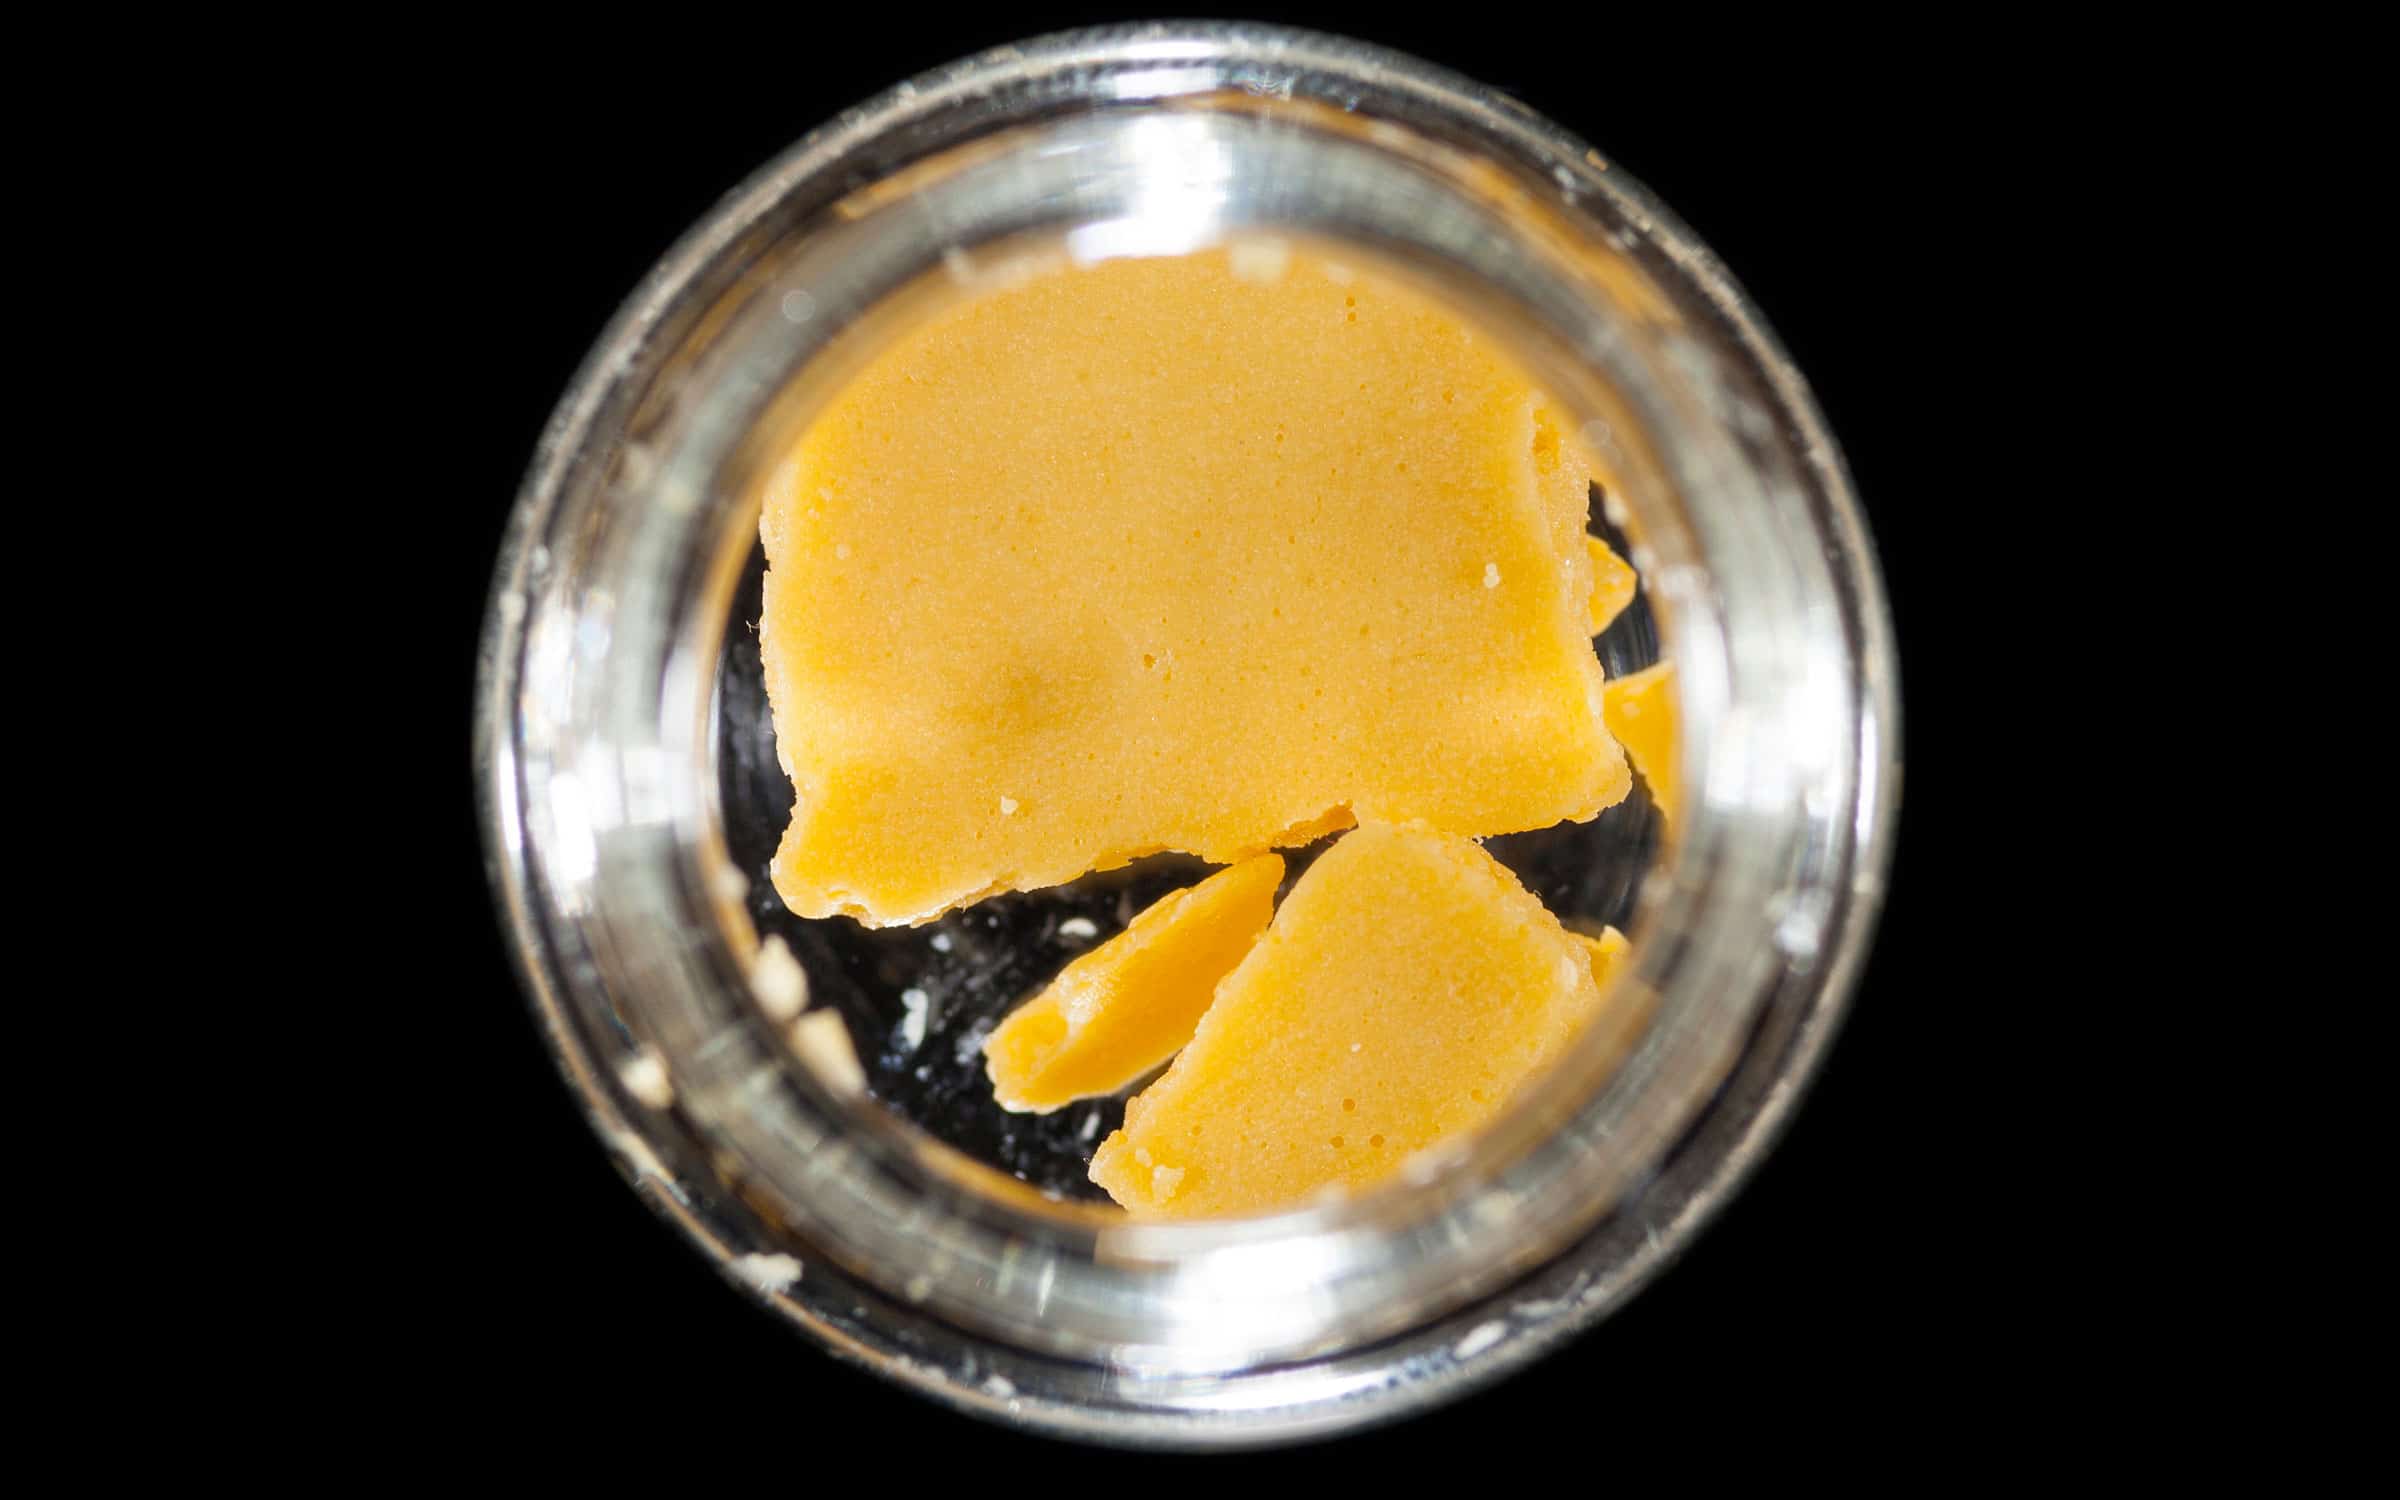 ch39_do_si_dos_synergy_cannabis_co_la_kush_and_critical_concentrates